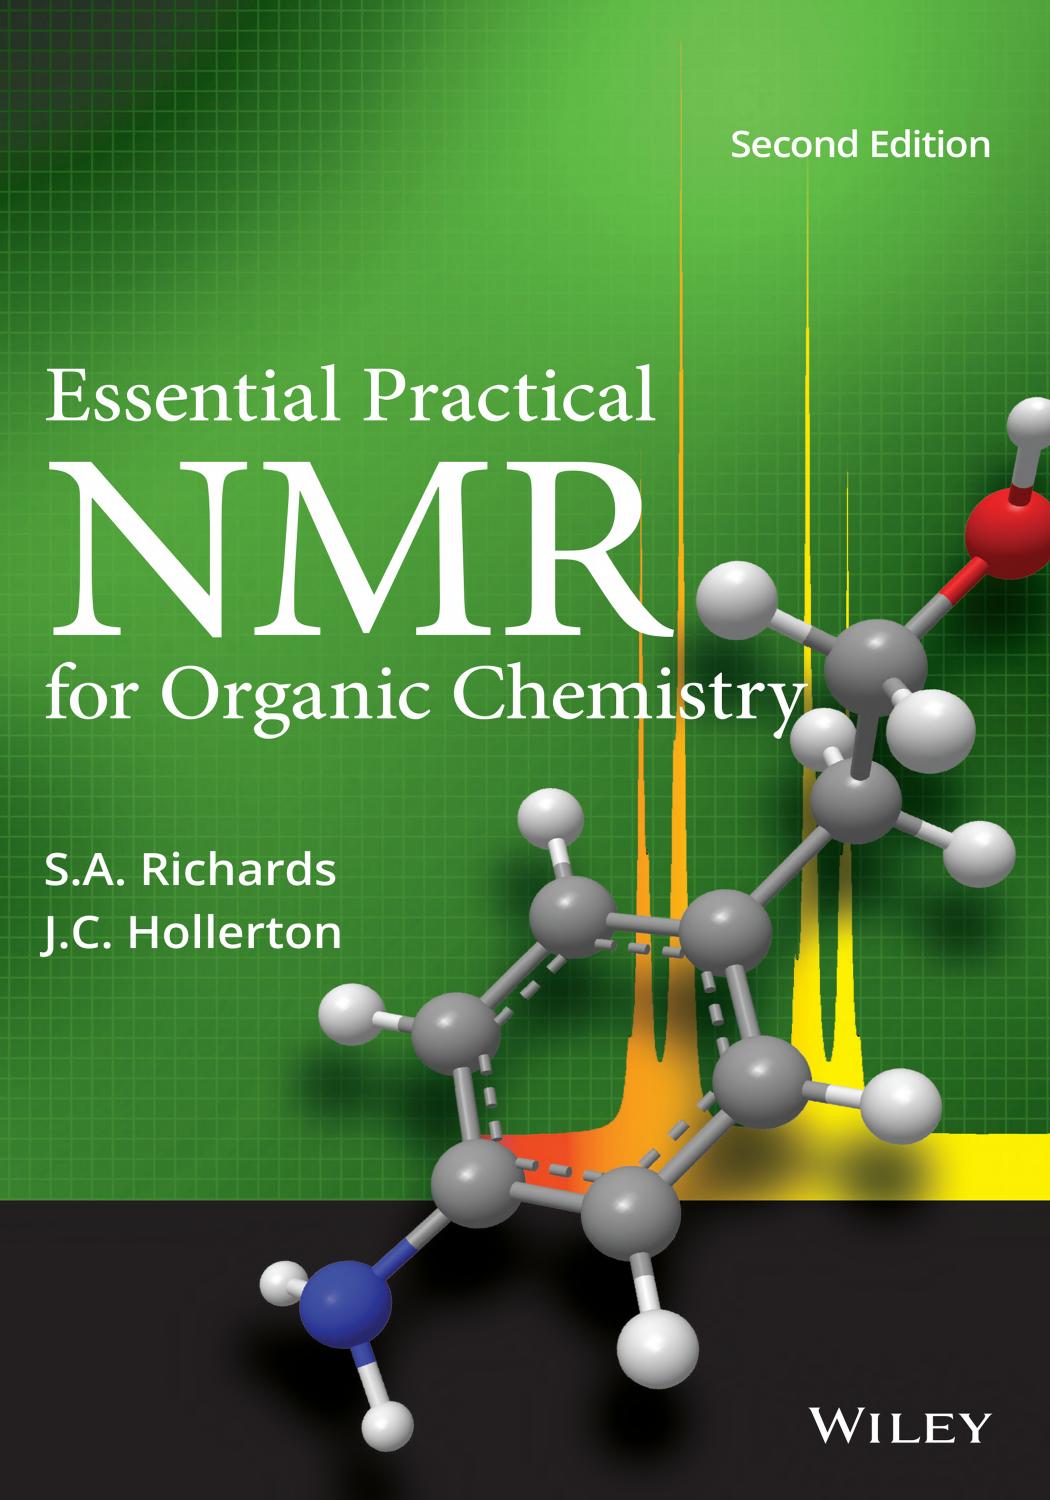 Essential Practical NMR for Organic Chemistry by Richards S.A. Hollerton J.C